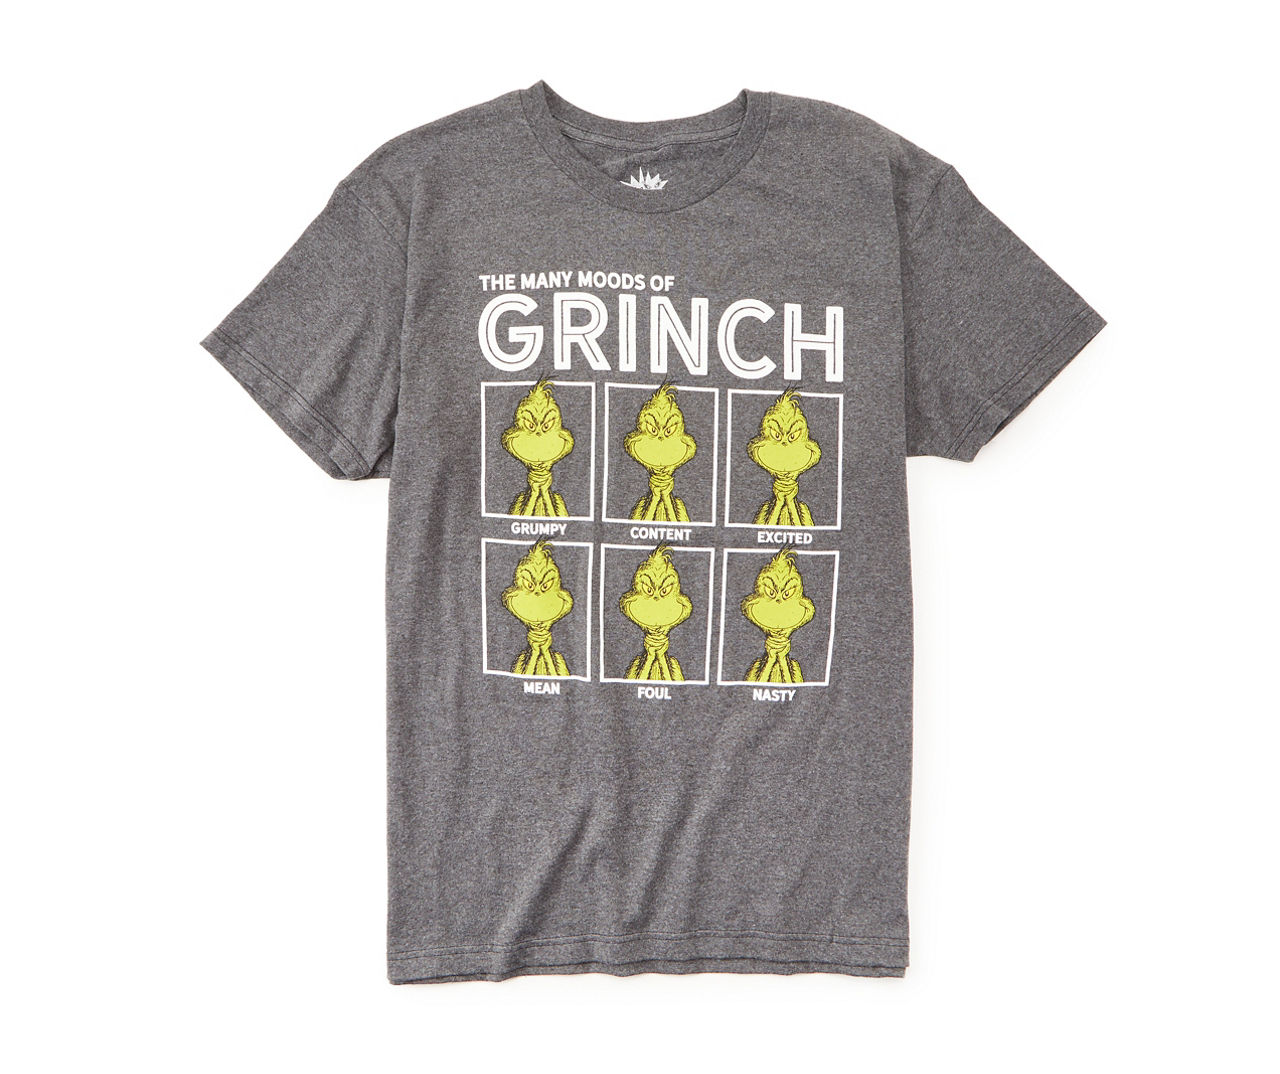 Men's Size 2X-Large "Moods of Grinch" Charcoal Heather Graphic Tee